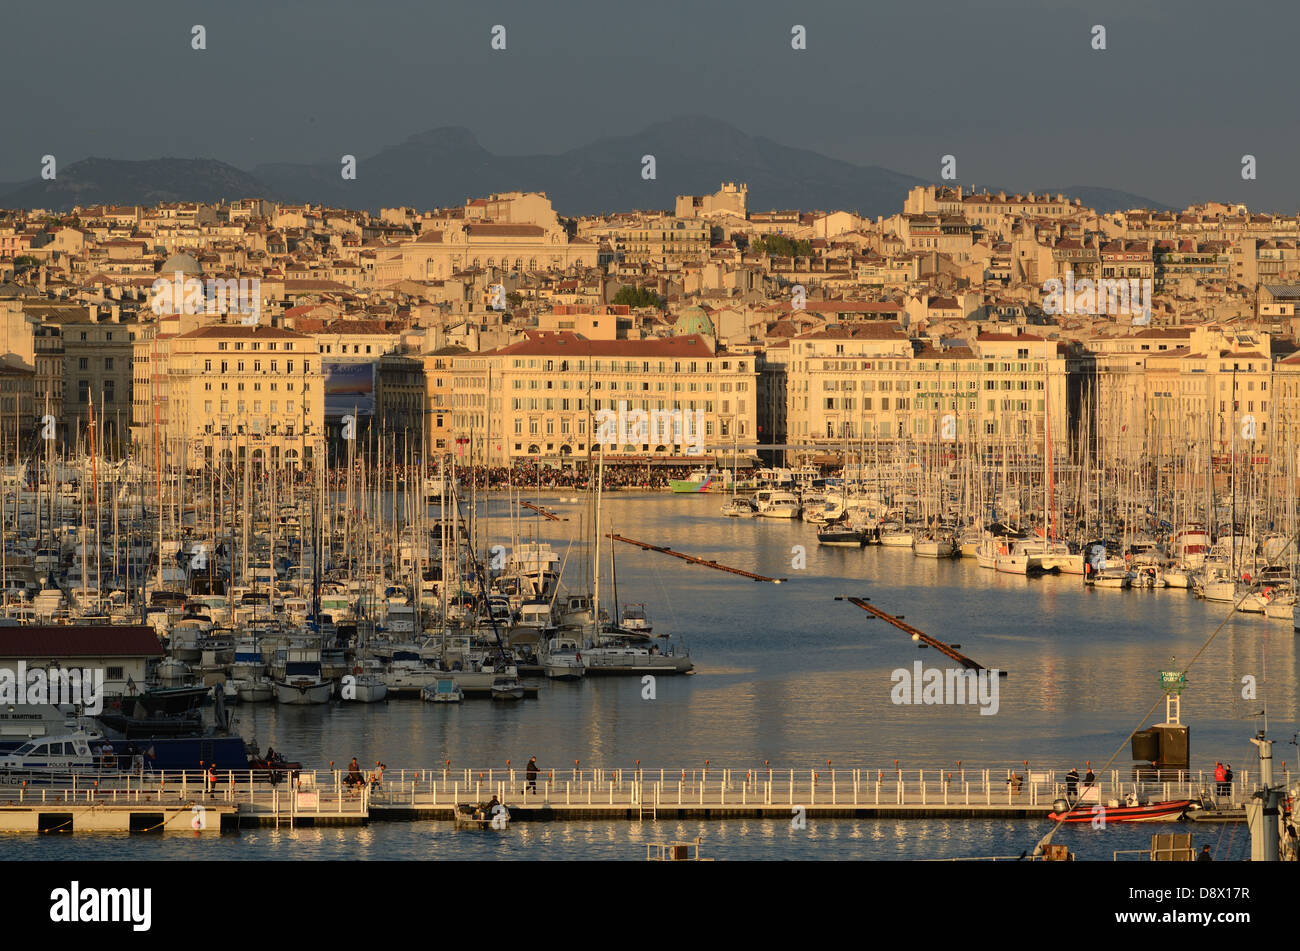 Urban Skyline & View of Old Port or Vieux Port and Quai des Belges Quay or Quayside at Dusk Evening or Twilight Marseille Provence France Stock Photo